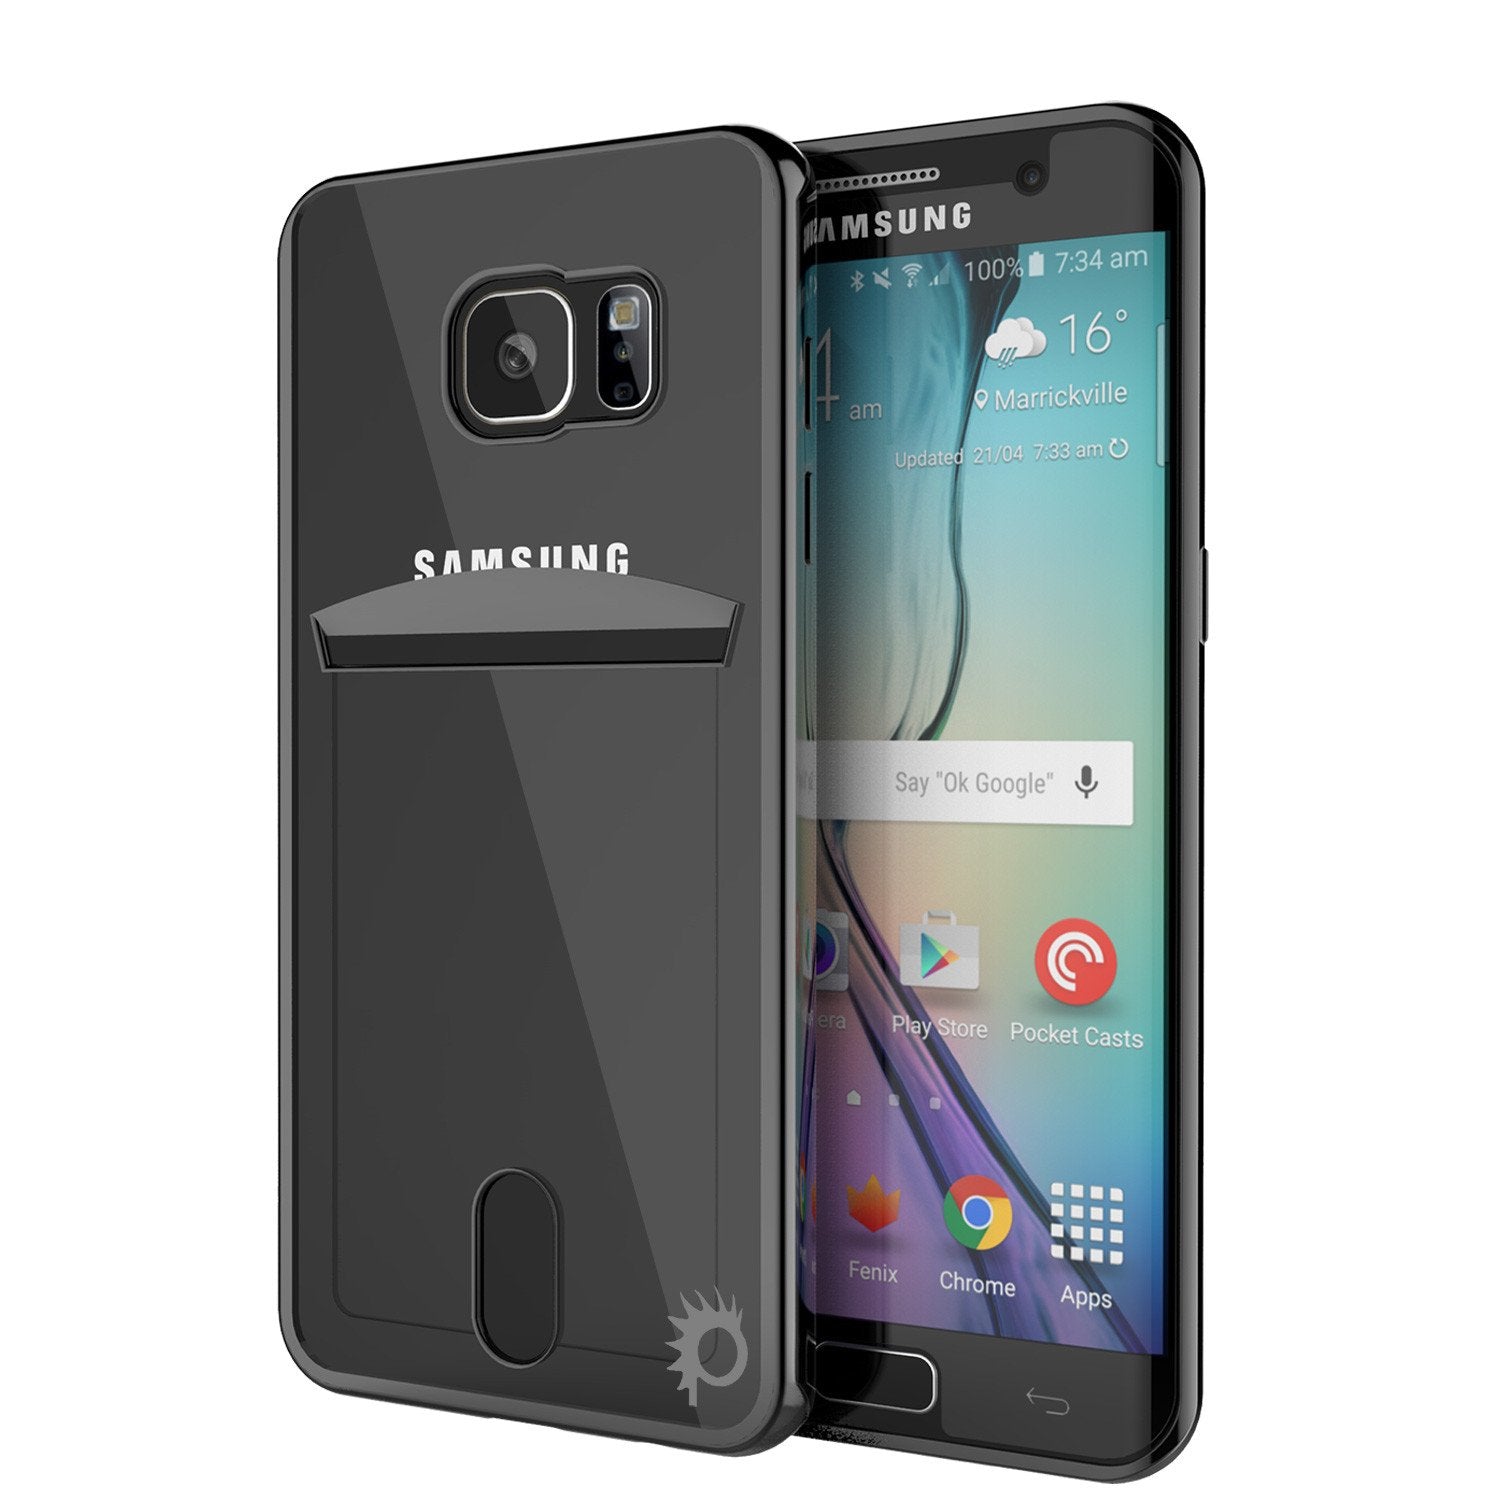 Galaxy S6 Case, PUNKCASE® LUCID Black Series | Card Slot | SHIELD Screen Protector | Ultra fit